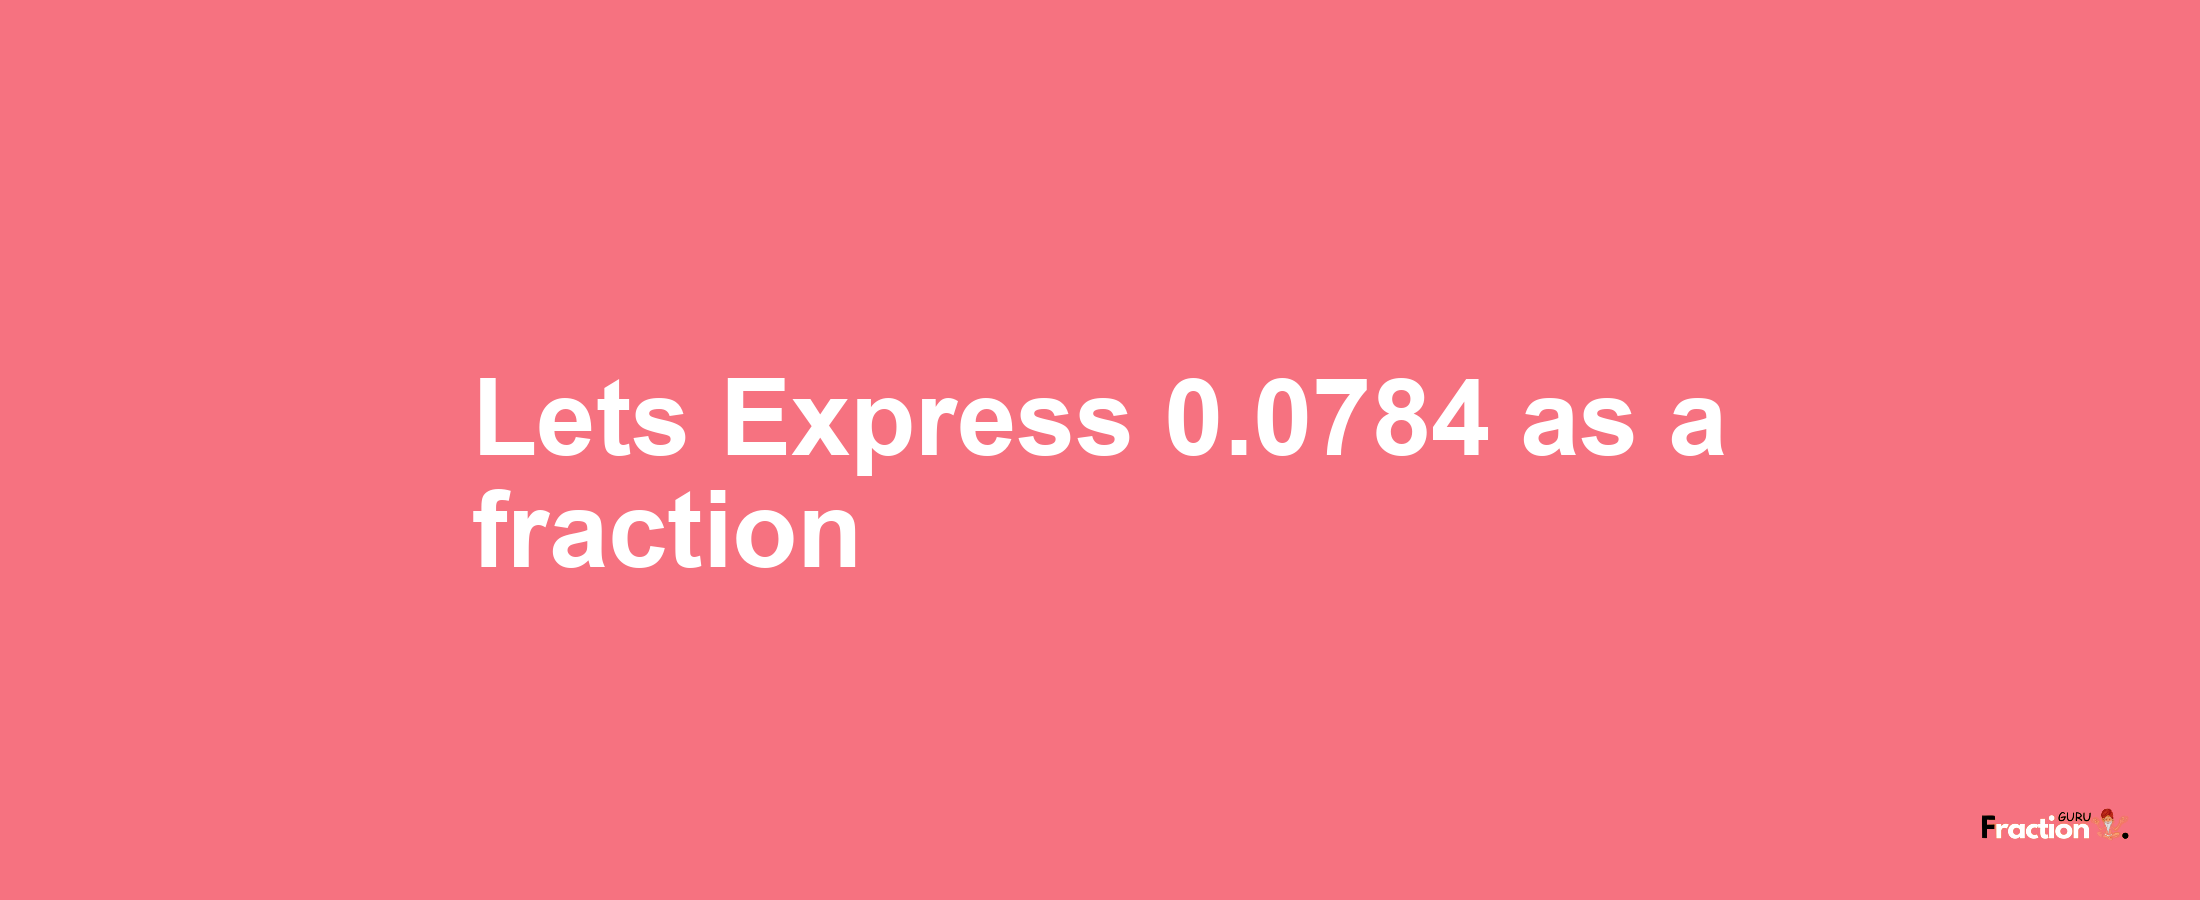 Lets Express 0.0784 as afraction